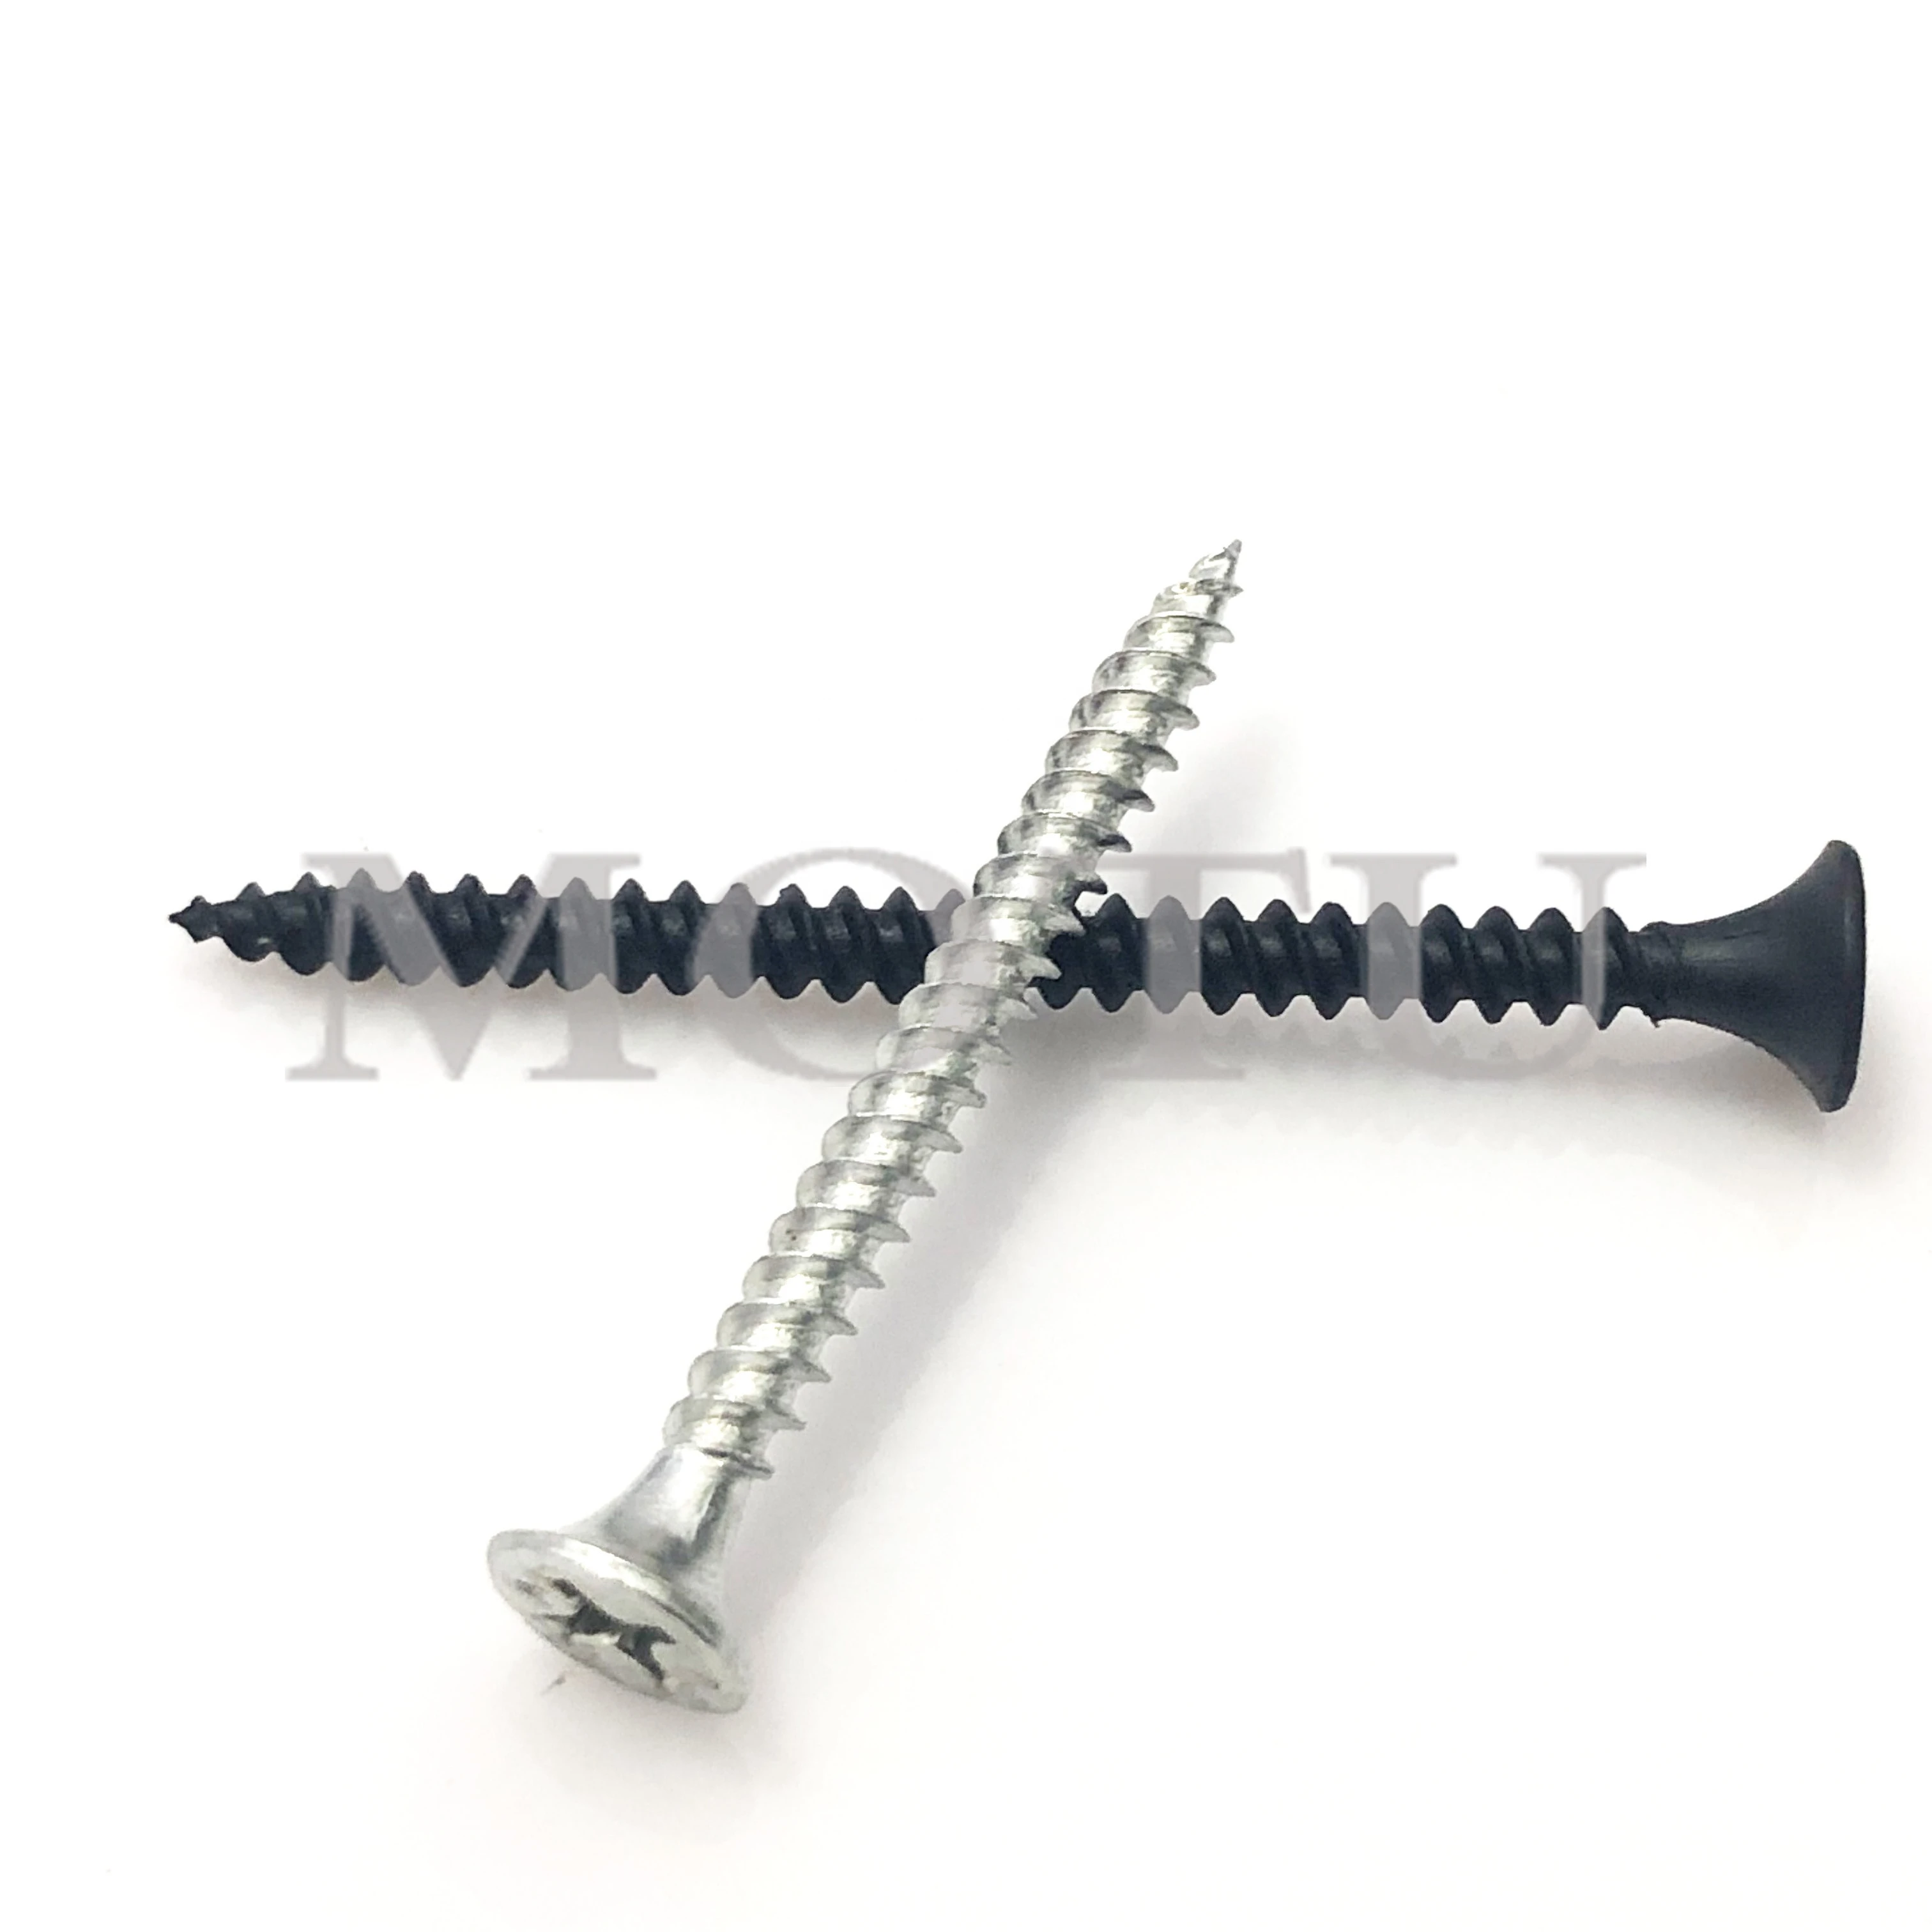 bugle head sharp point drywall screw fine thread for plasterboard and lingt track ready to ship